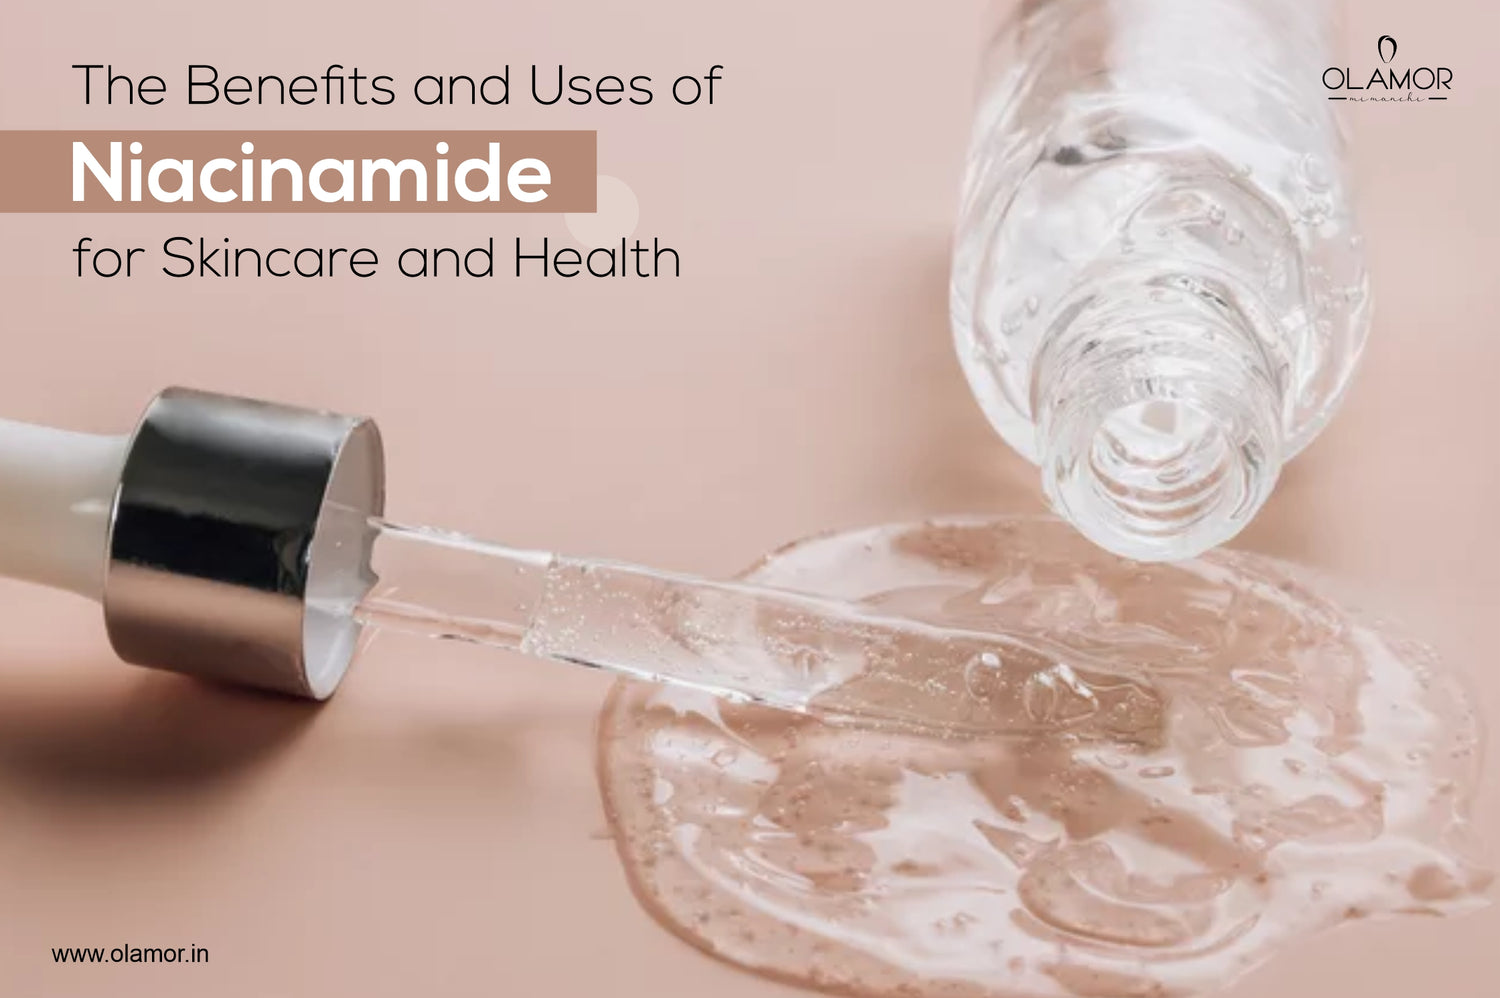 The Benefits and Uses of Niacinamide for Skincare and Health